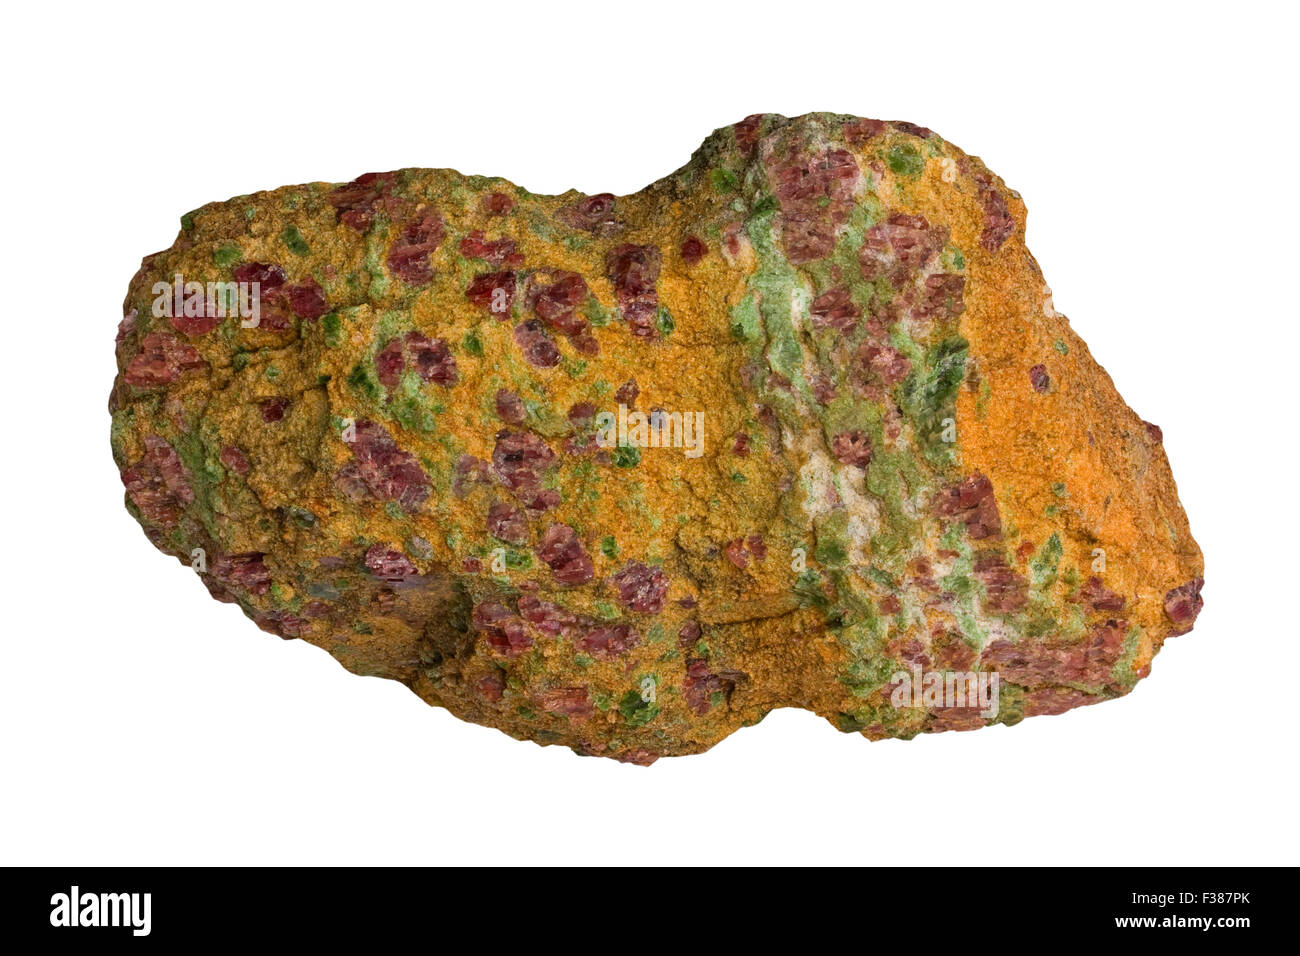 Peridotite (wehrlite) with yellow olivine, green chromian diopside and red pyrope (Mg-garnet) Stock Photo